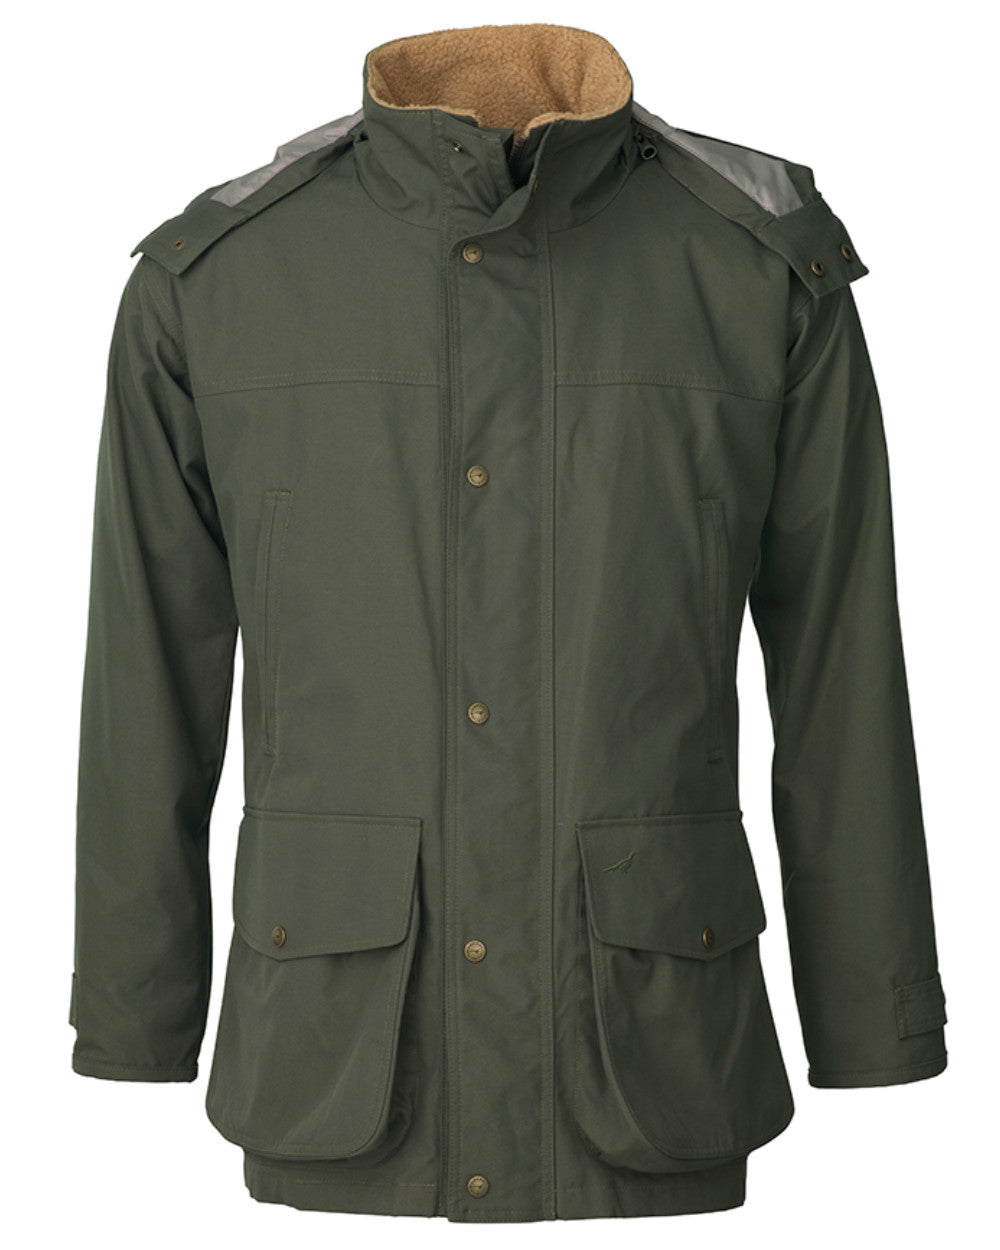 Olive Coloured Laksen Merlin Ventile Shooting Coat On A White Background 